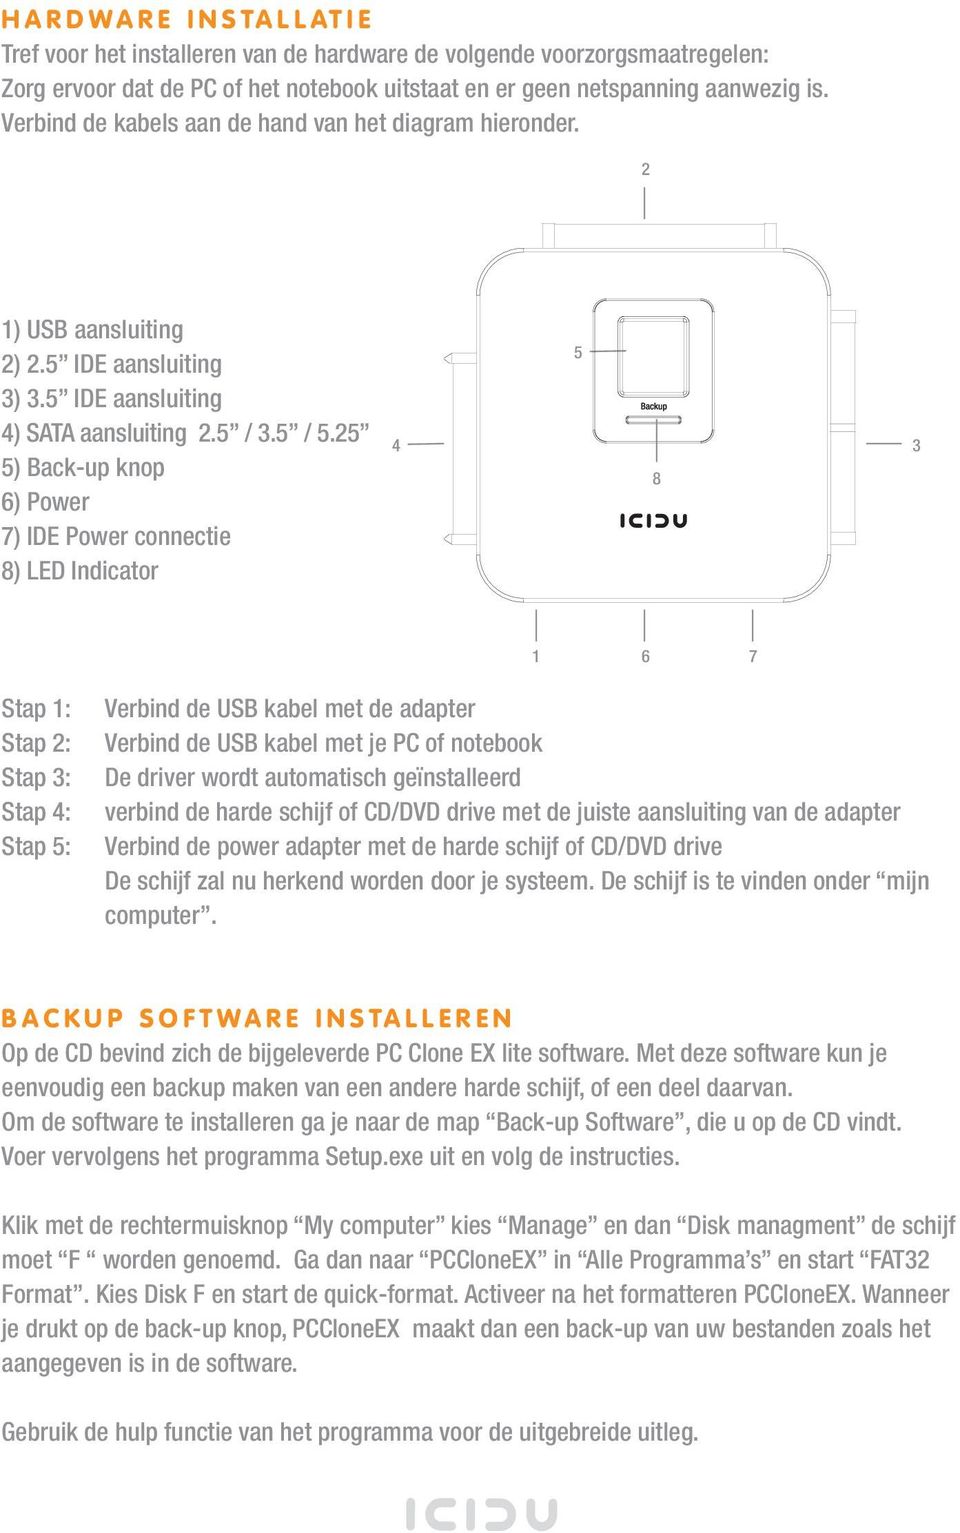 25 5) Back-up knop 6) Power 7) IDE Power connectie 8) LED Indicator 4 5 8 3 1 6 7 Stap 1: Stap 2: Stap 3: Stap 4: Stap 5: Verbind de USB kabel met de adapter Verbind de USB kabel met je PC of